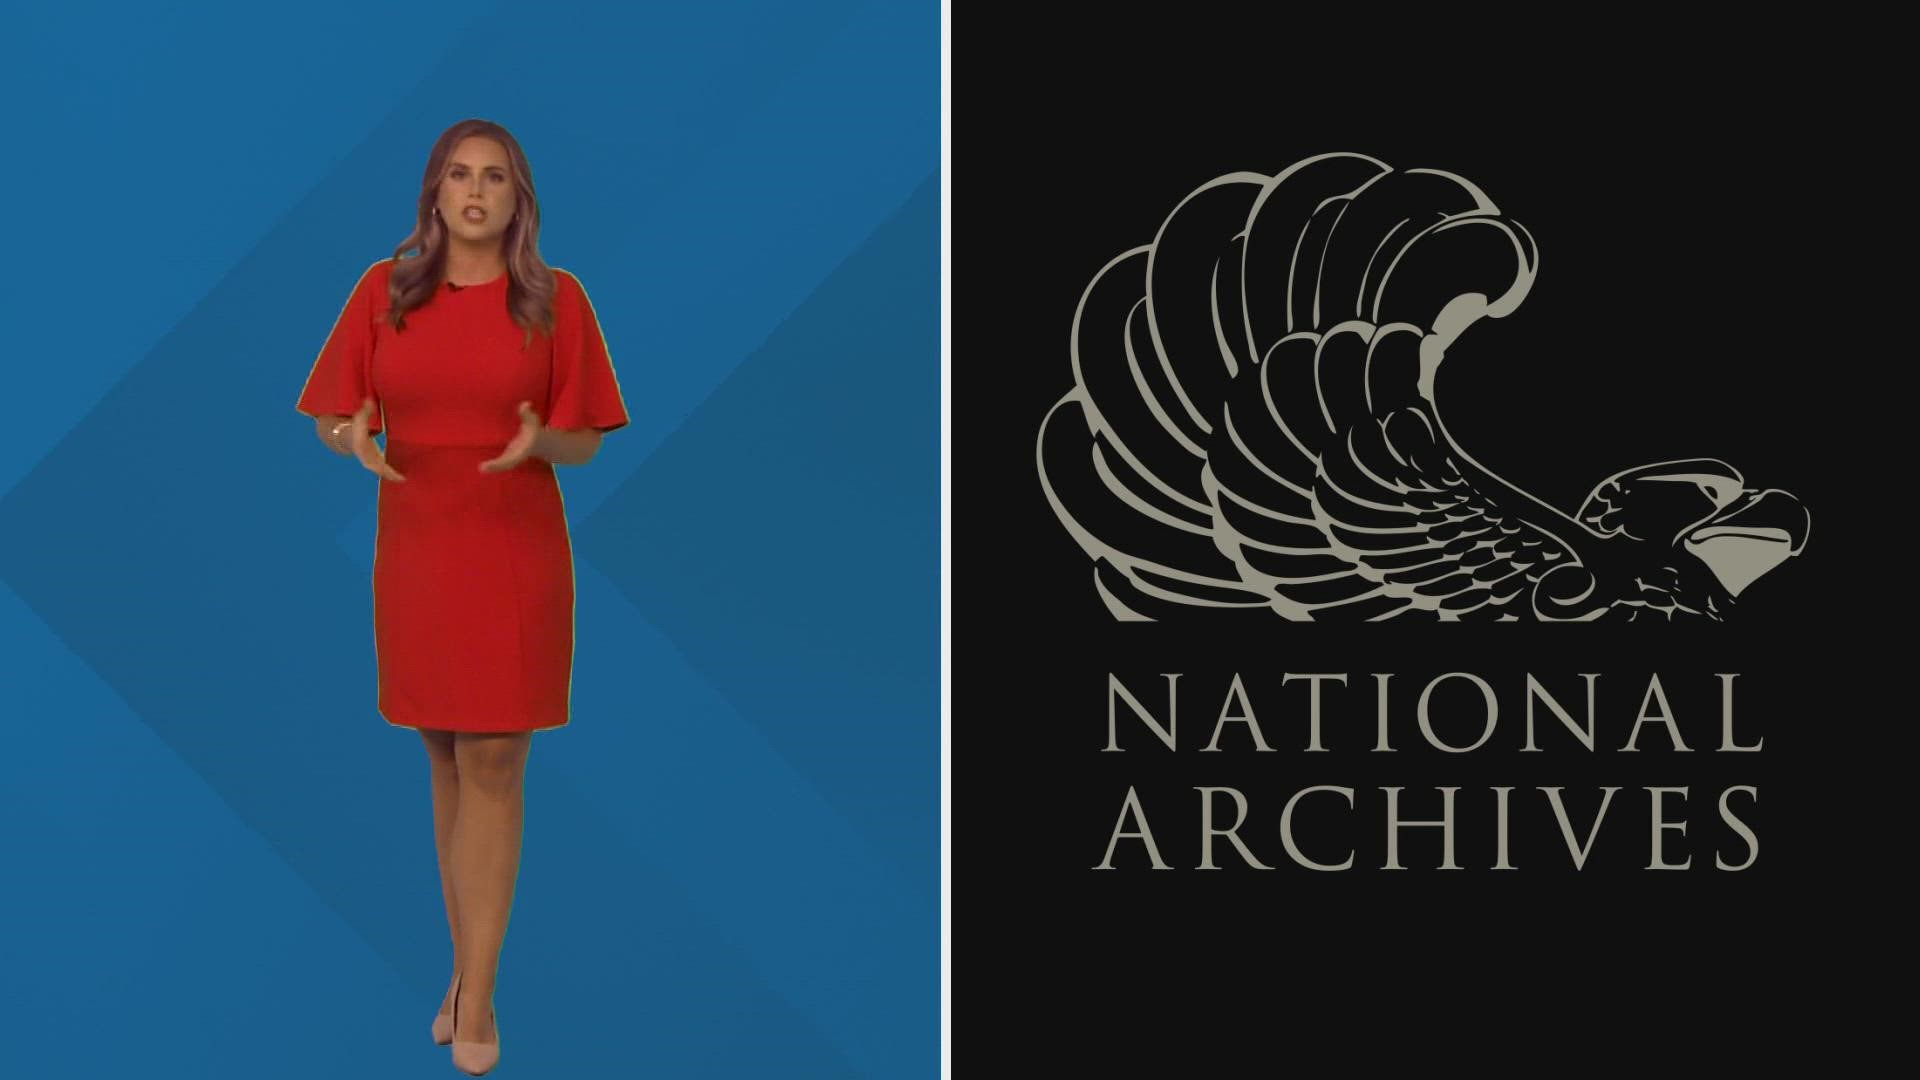 The National Archives and Records Administration is the nation's record keeper.